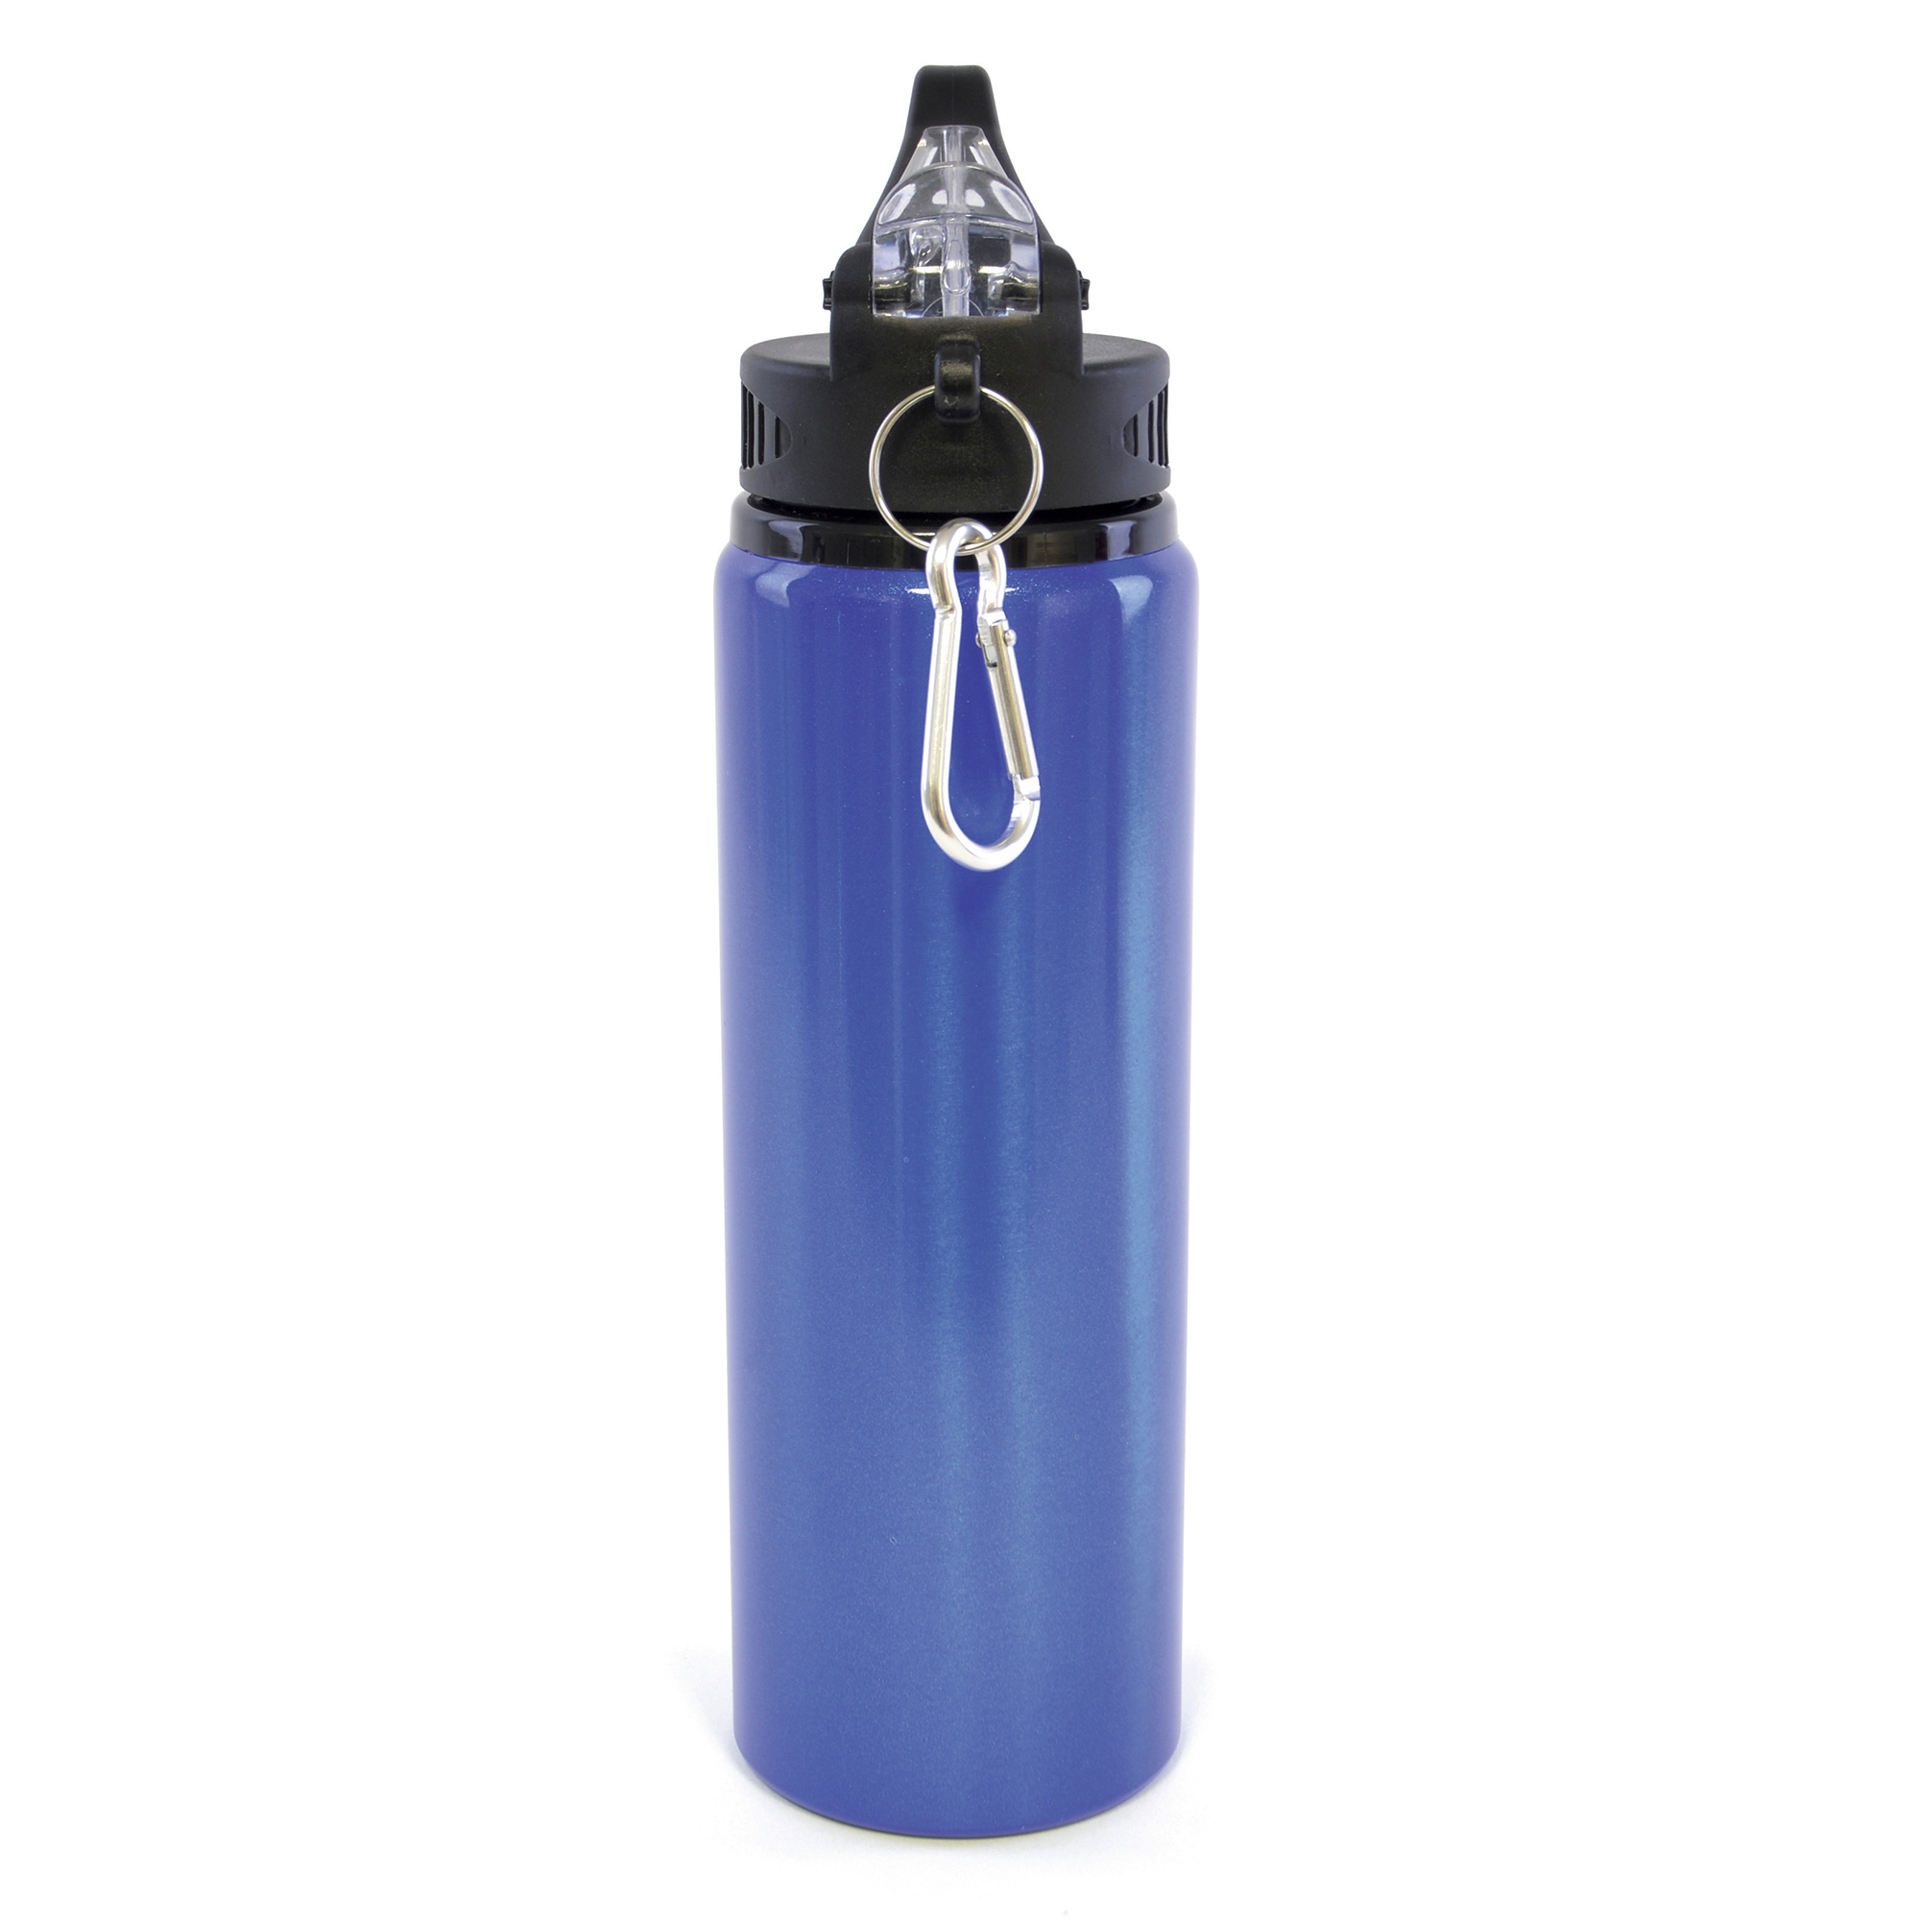 Blue metal drinking bottle with flip down straw and carabiner hook